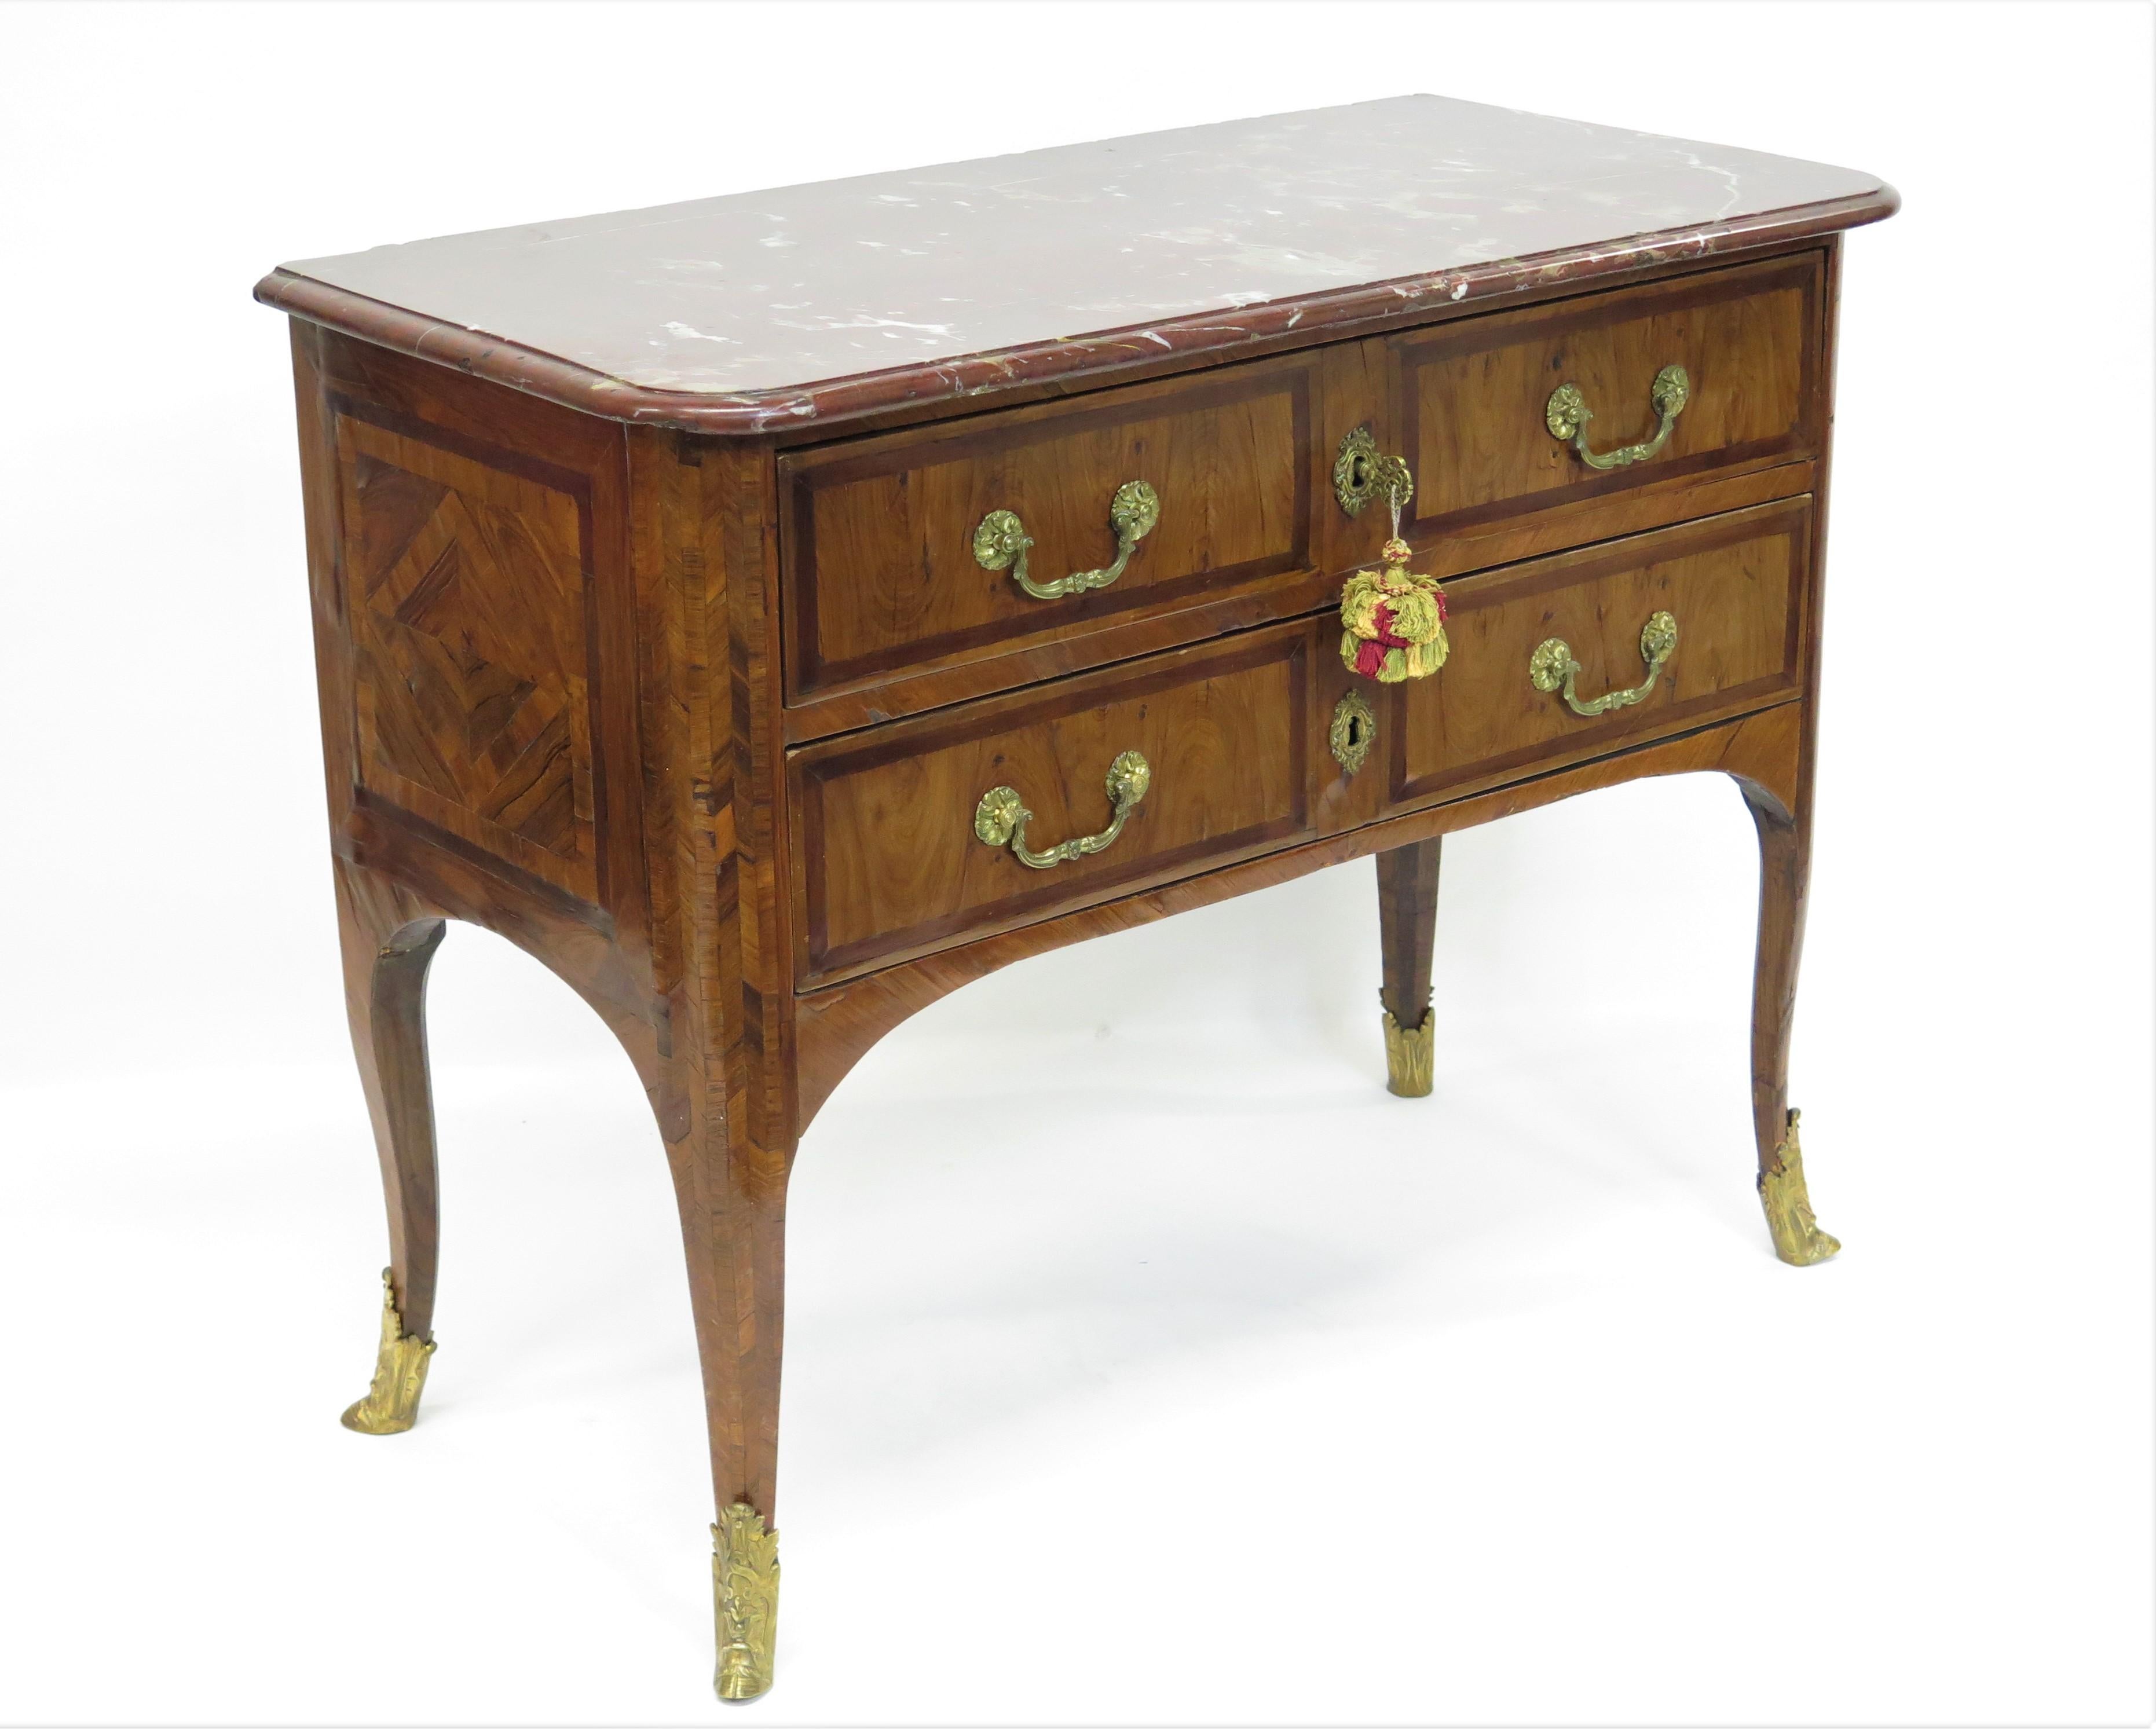 Louis XV two drawer commode with marquetry decoration, reddish marble top having grey and tan veining, shaped legs with gilt bronze sabots. with key, France, mid 18th century